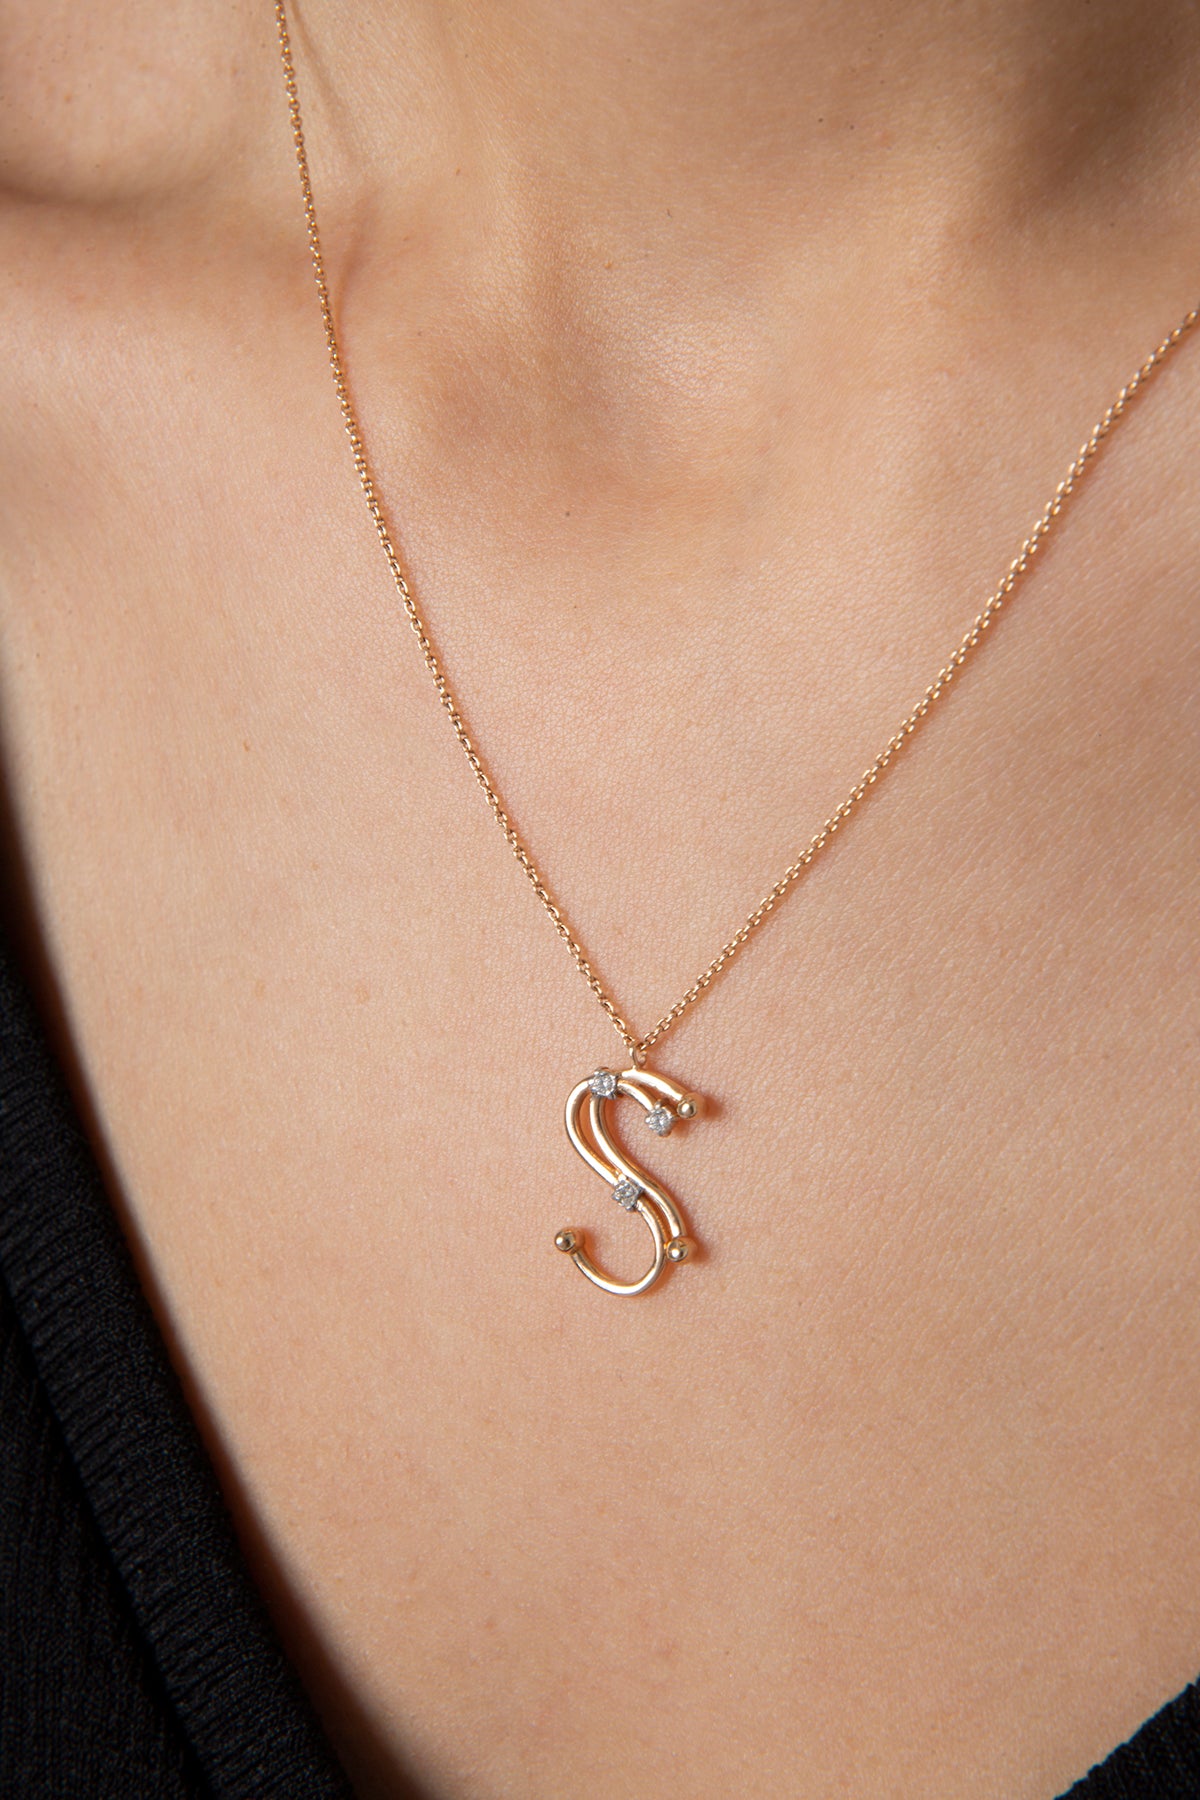 Galactic Necklace Initials in Rose Gold - Her Story Shop